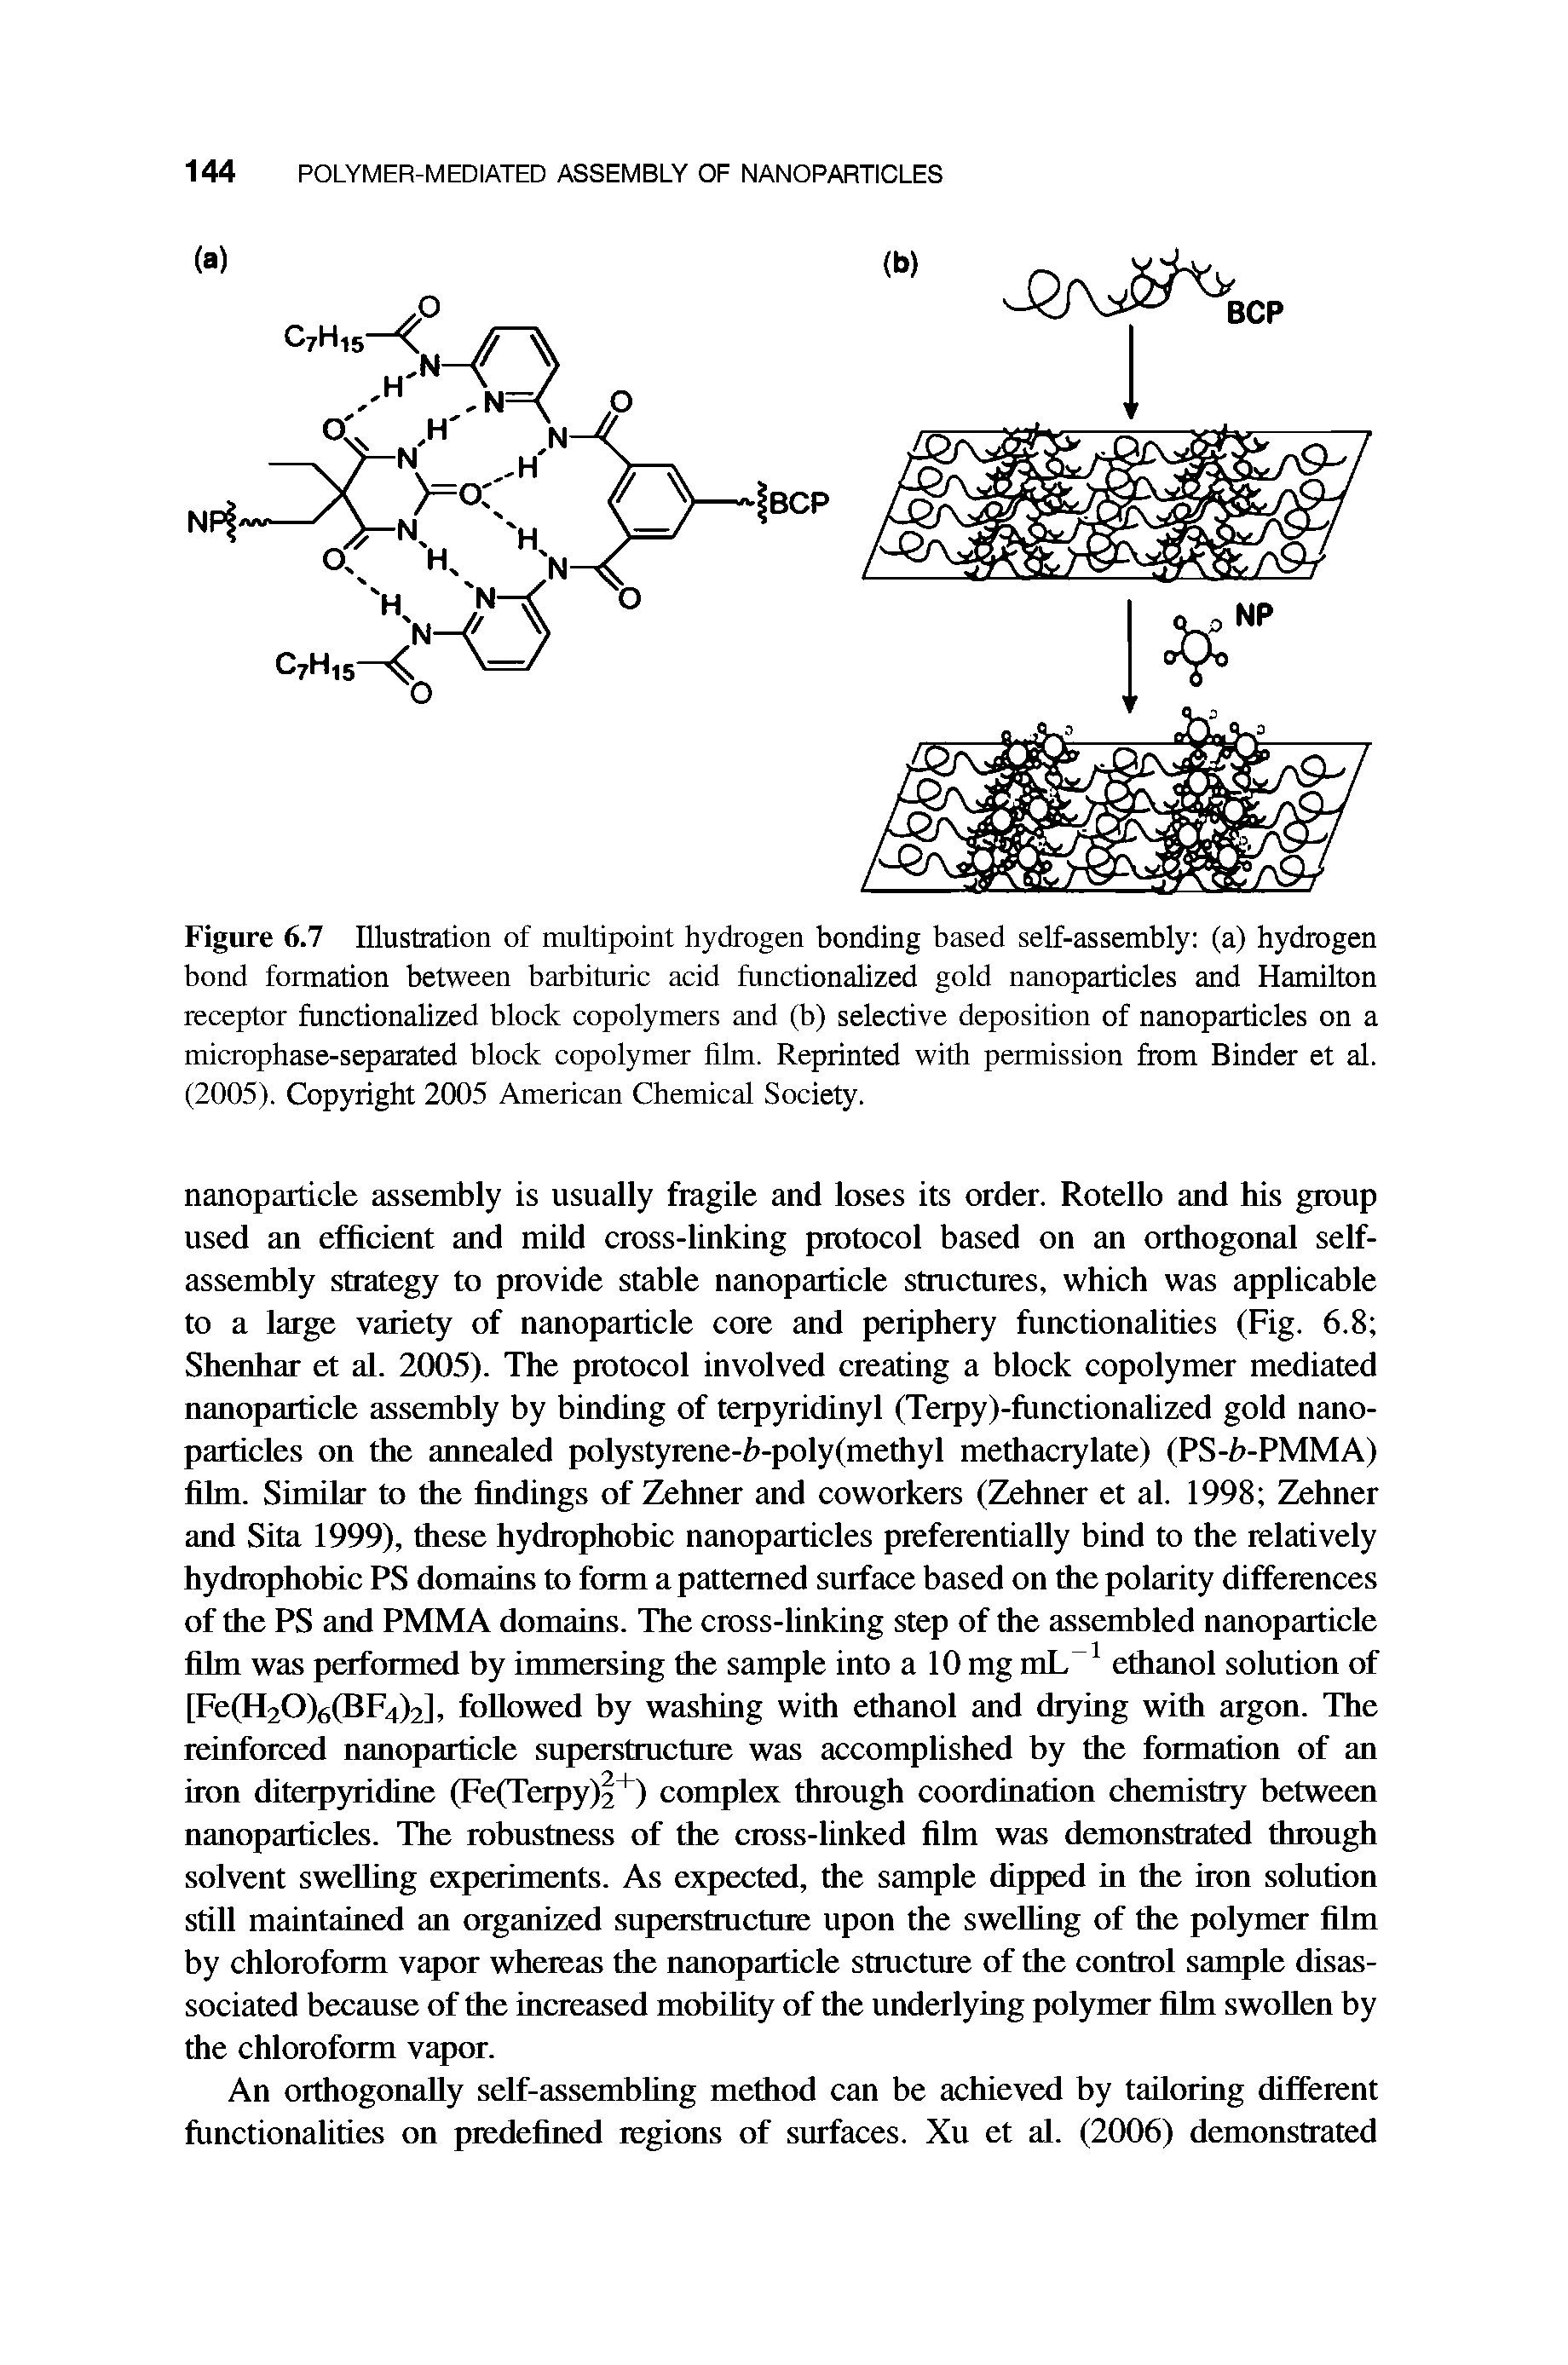 Figure 6.7 Illustration of multipoint hydrogen bonding based self-assembly (a) hydrogen bond formation between barbituric acid functionalized gold nanoparticles and Hamilton receptor functionalized block copolymers and (b) selective deposition of nanoparticles on a microphase-separated block copolymer film. Reprinted with permission fi om Binder et al. (2005). Copyright 2005 American Chemical Society.